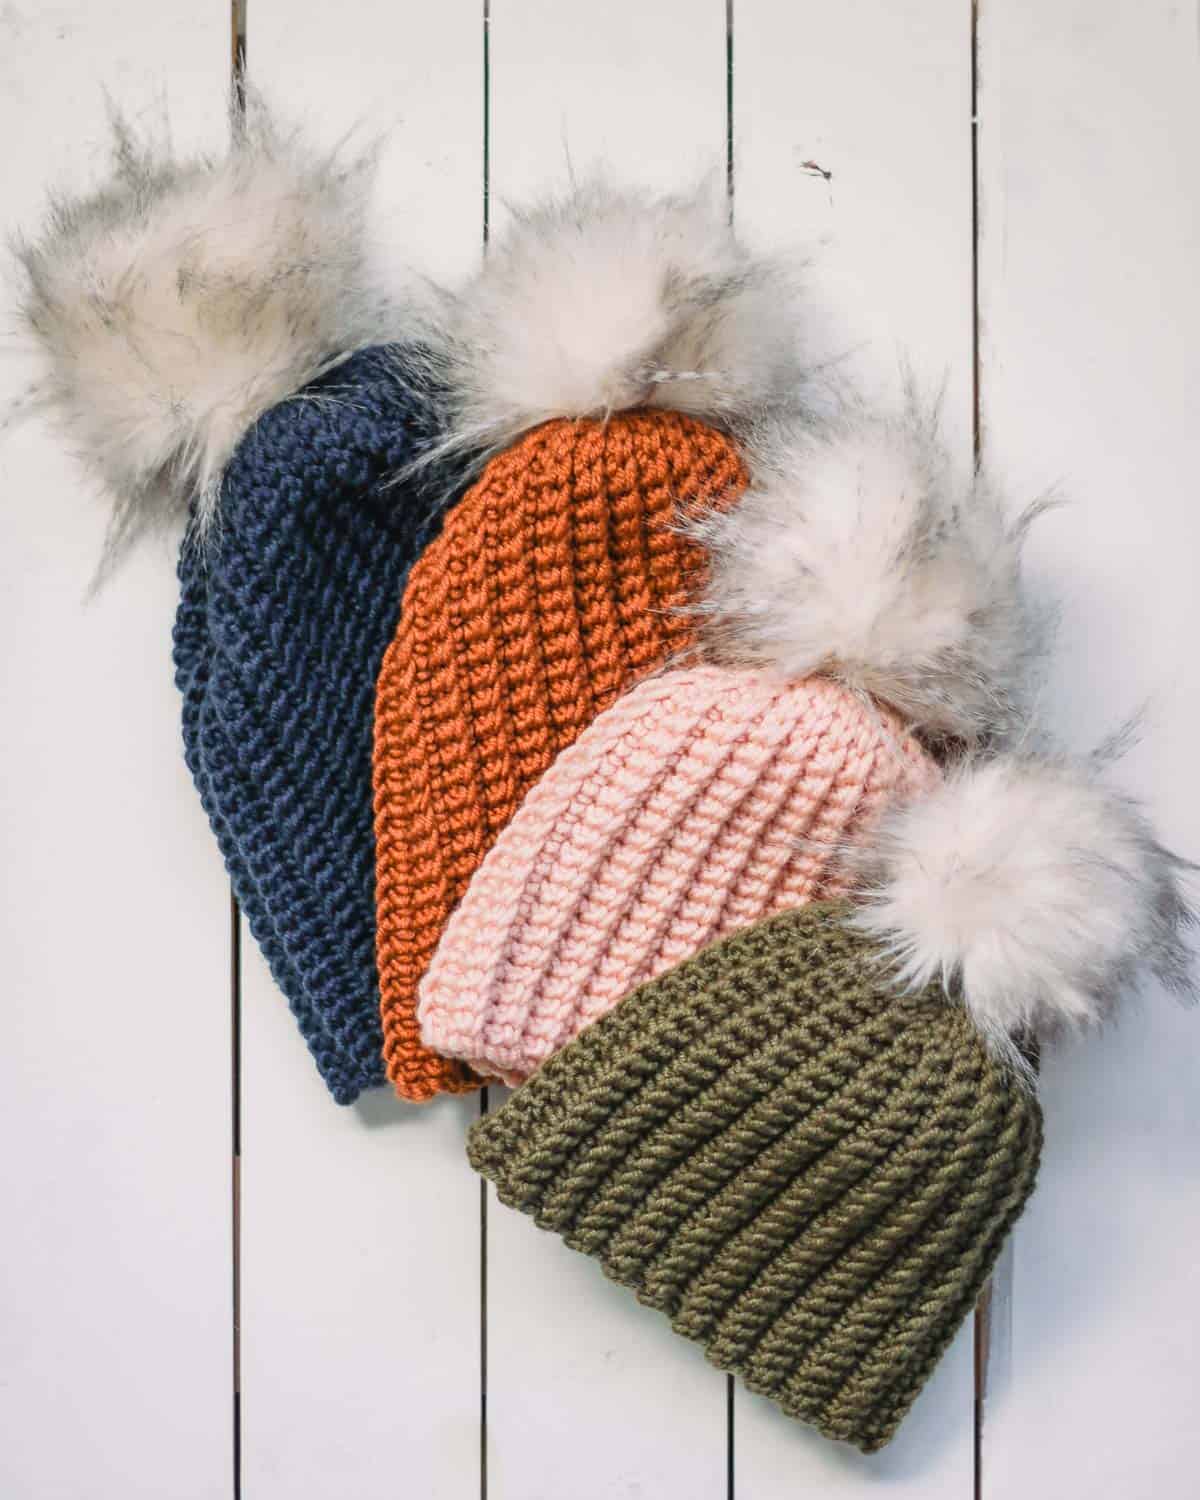 Four ribbed crochet beanies with fur pom poms laying on a white wood background. Hats in sizes baby-adult.